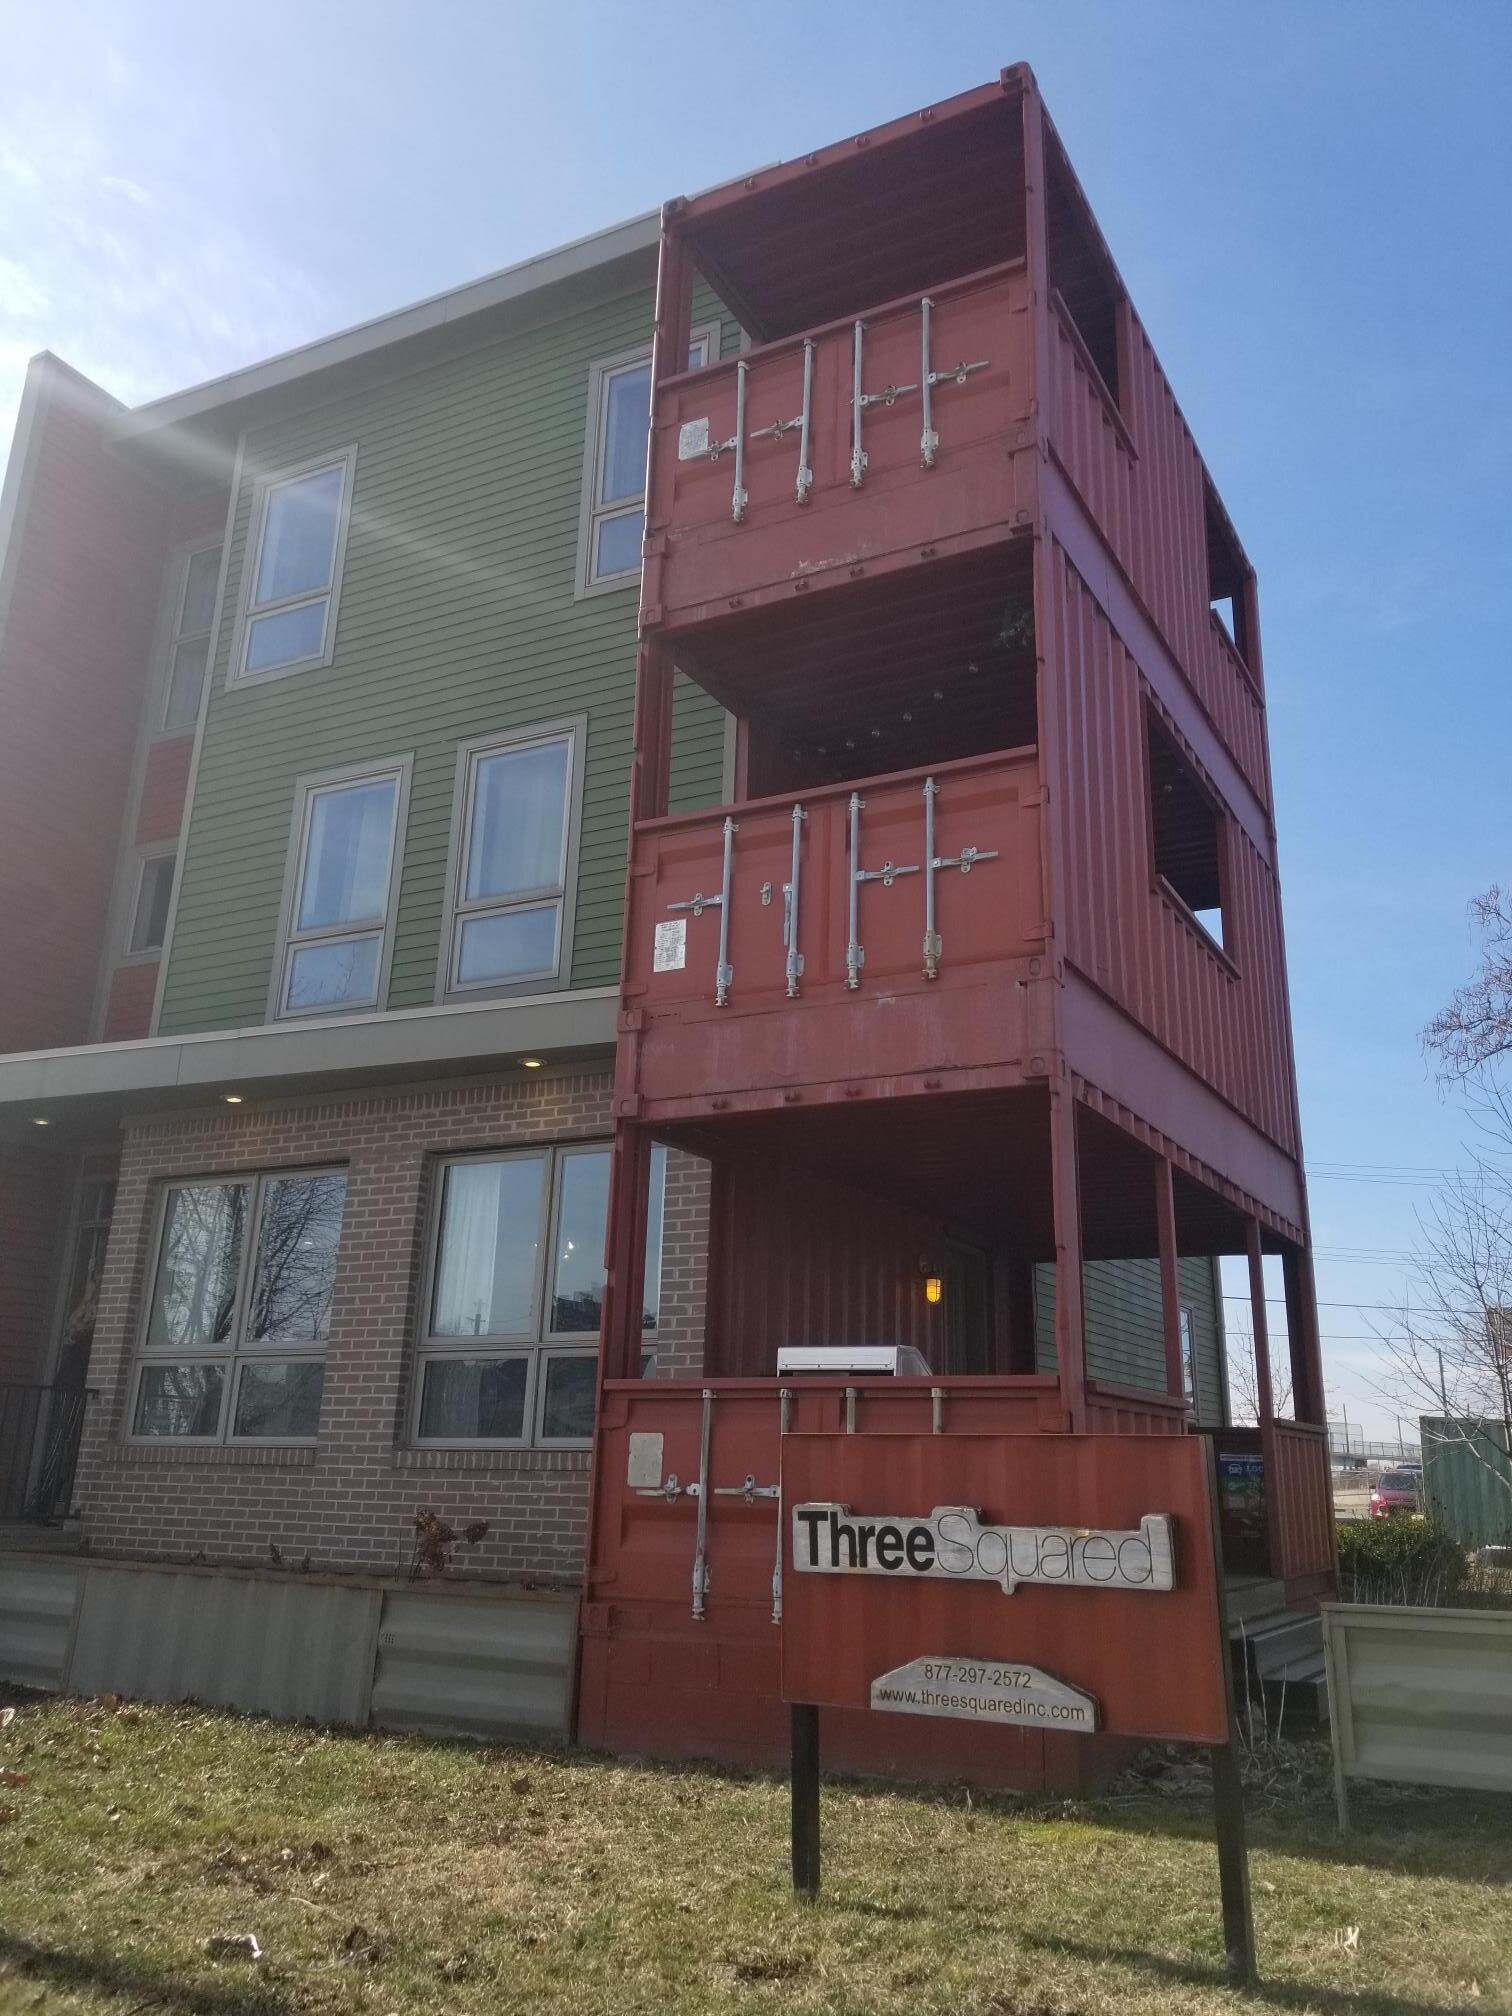 Housing in Detroit, Mich., that utilizes shipping containers as porches and patios.